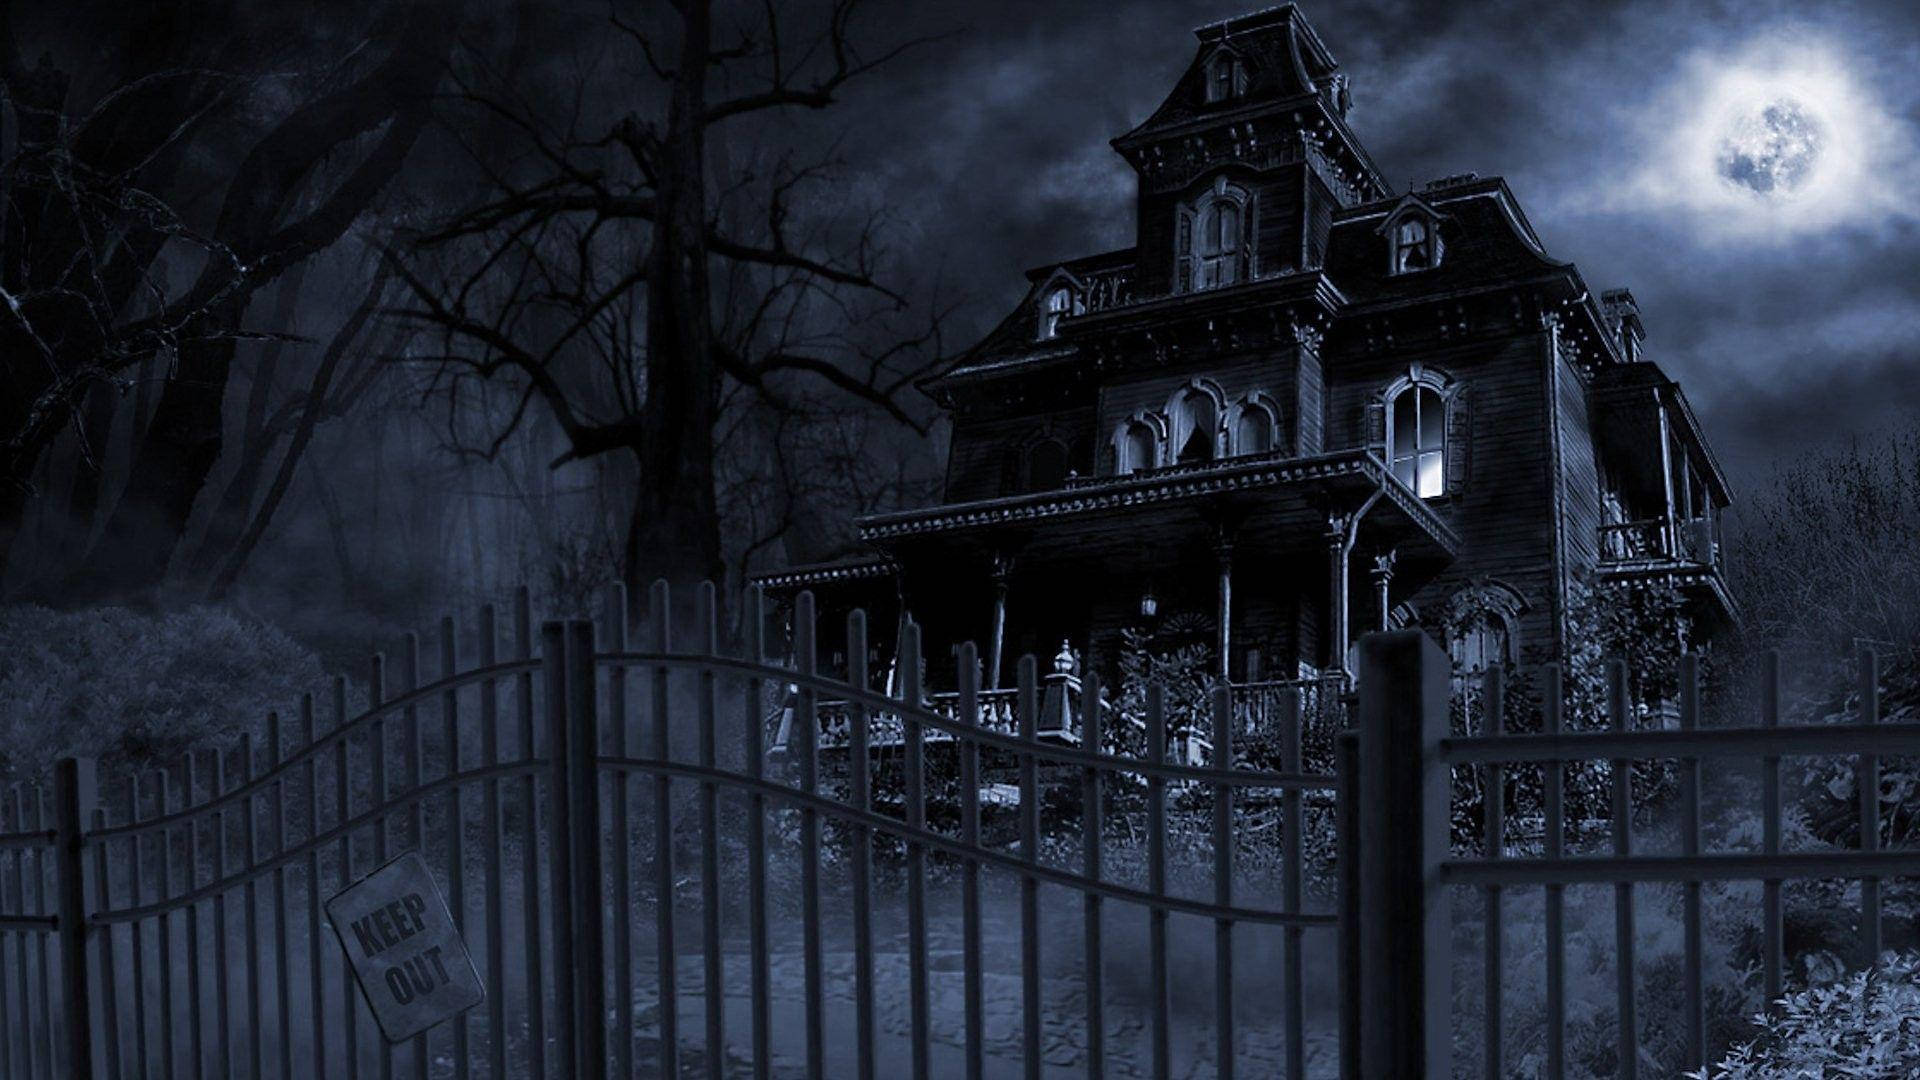 A Beautiful Haunted House On A Spooky Halloween Night. Wallpaper